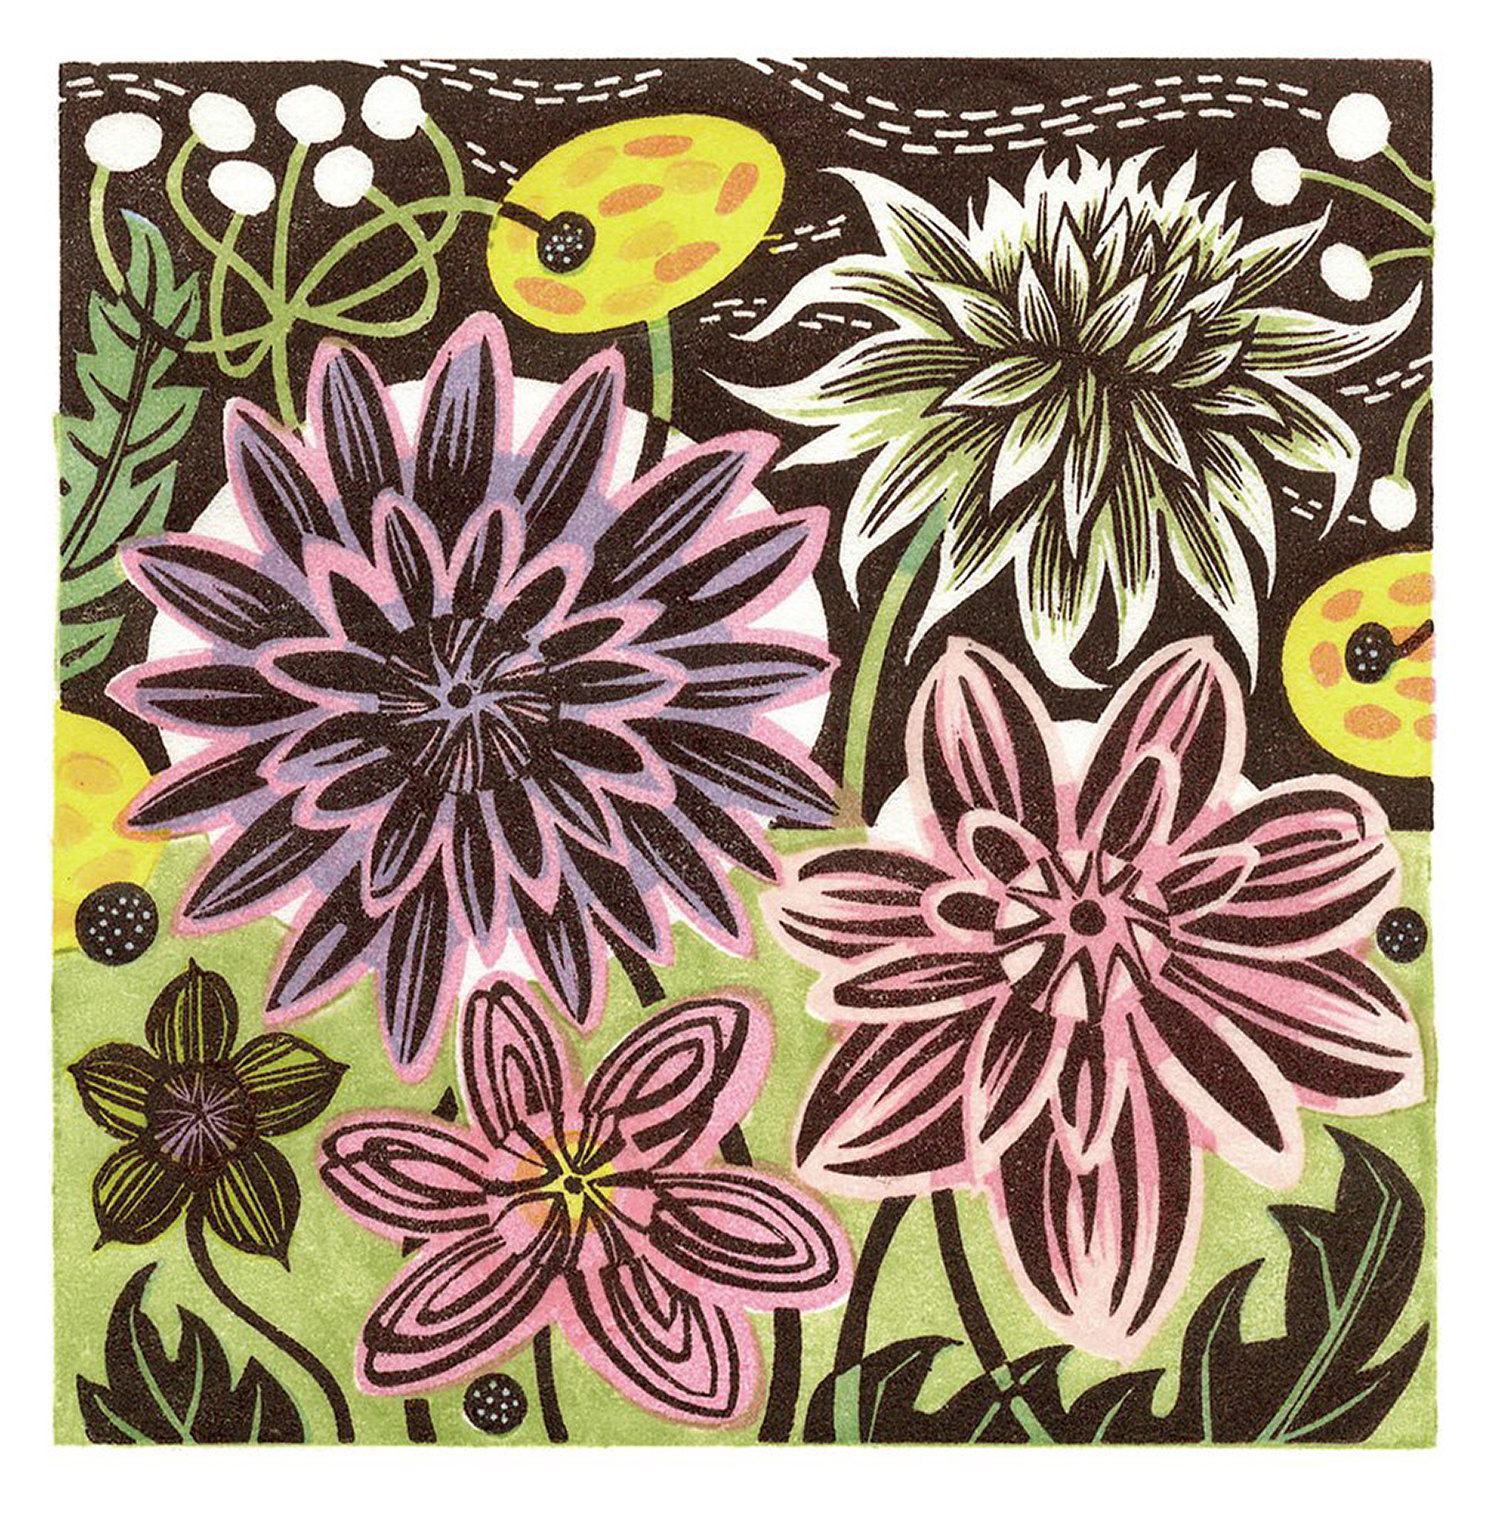 Dahlias & Anemones by Angie Lewin